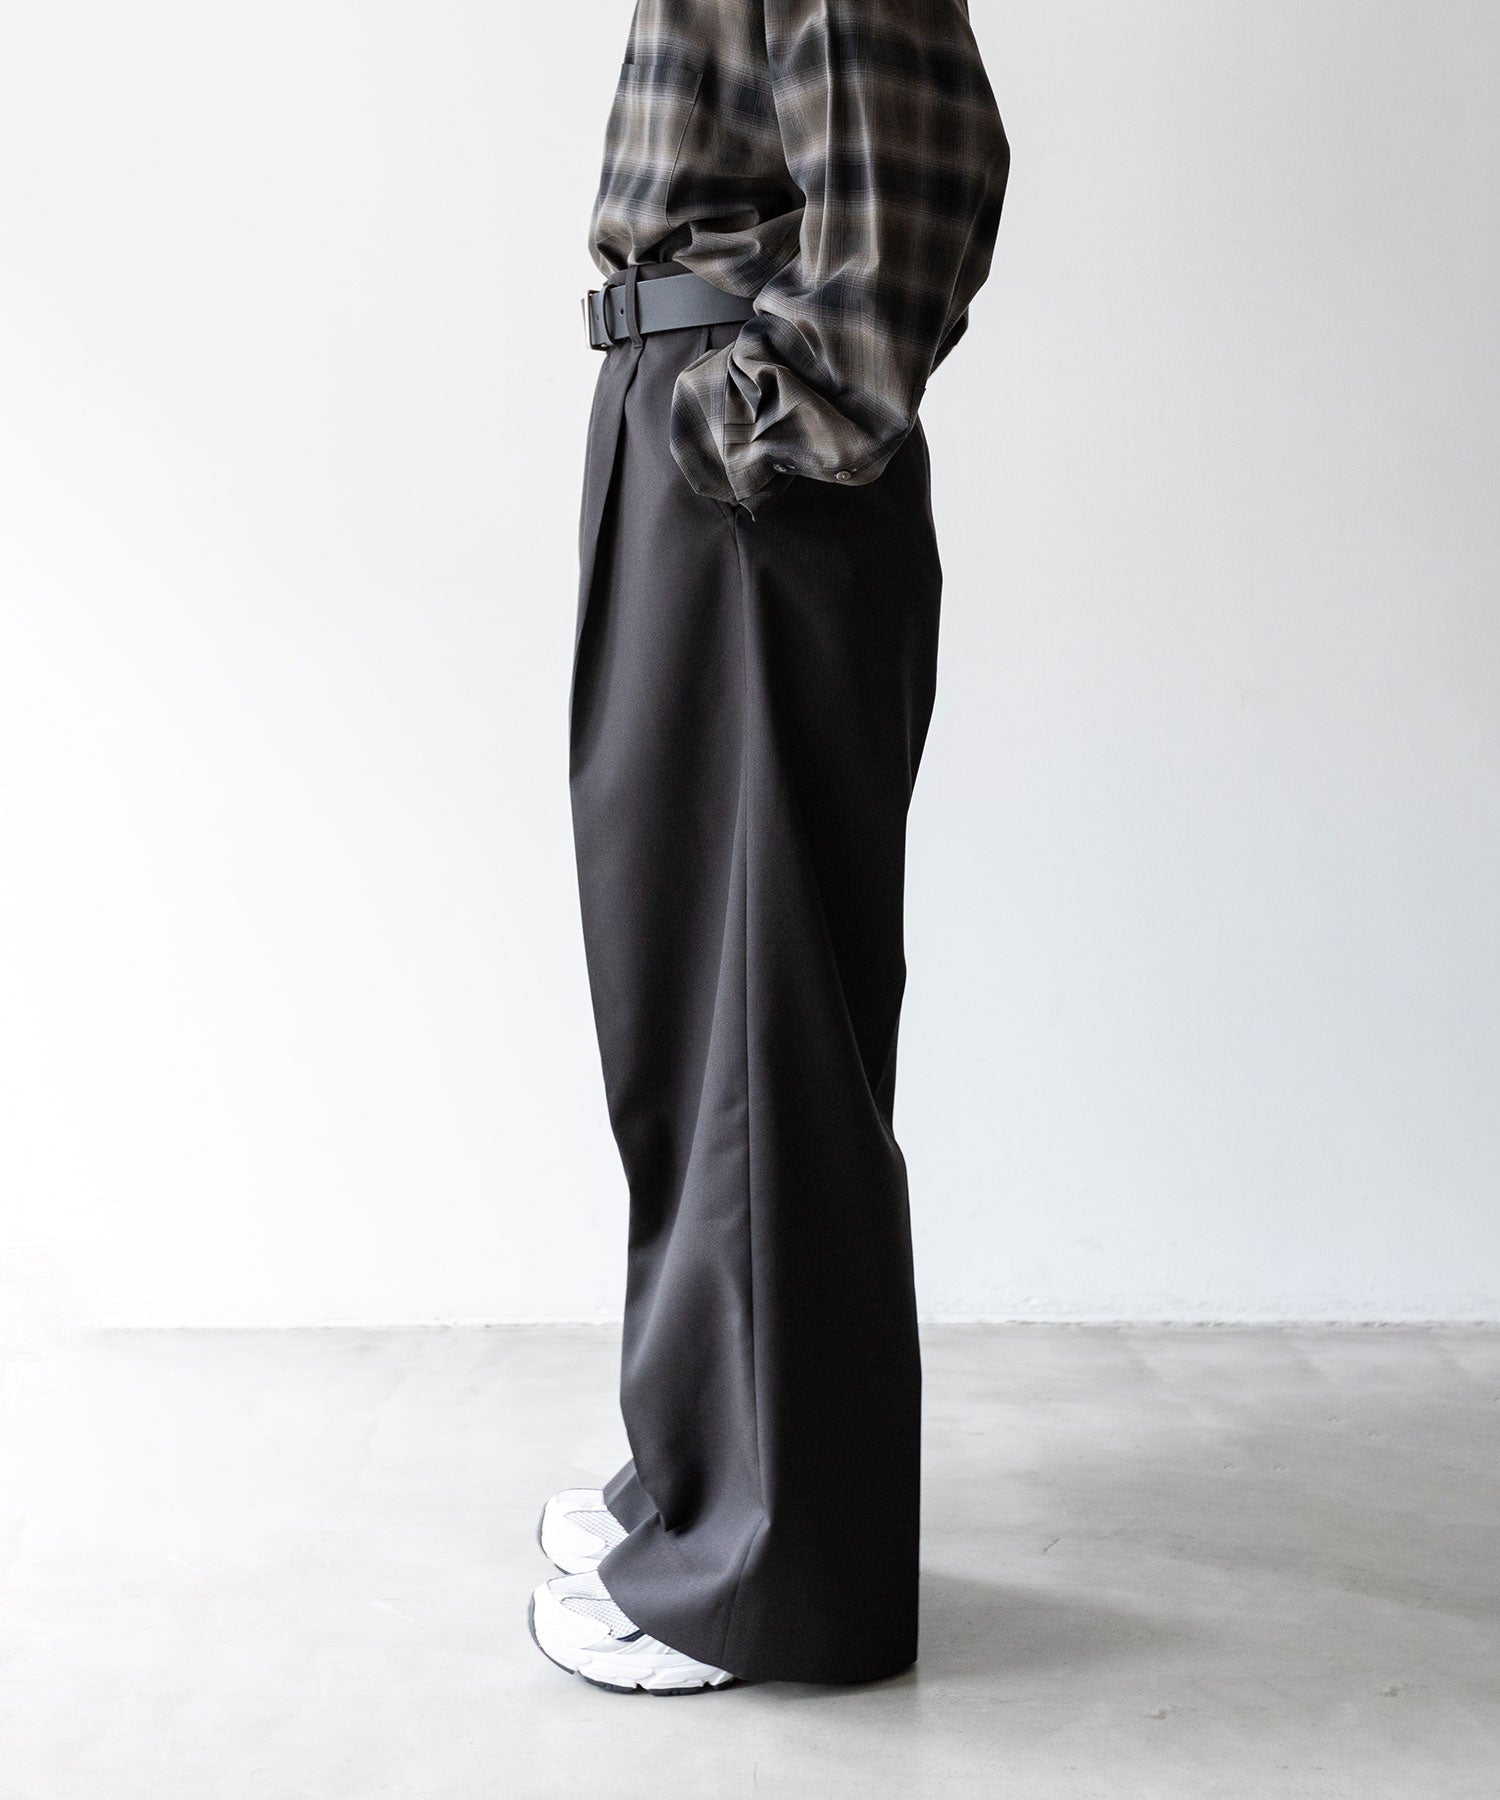 stein シュタイン 23aw EXTRA WIDE TROUSERS sessionセッション福岡セレクトショップ 公式通販サイト